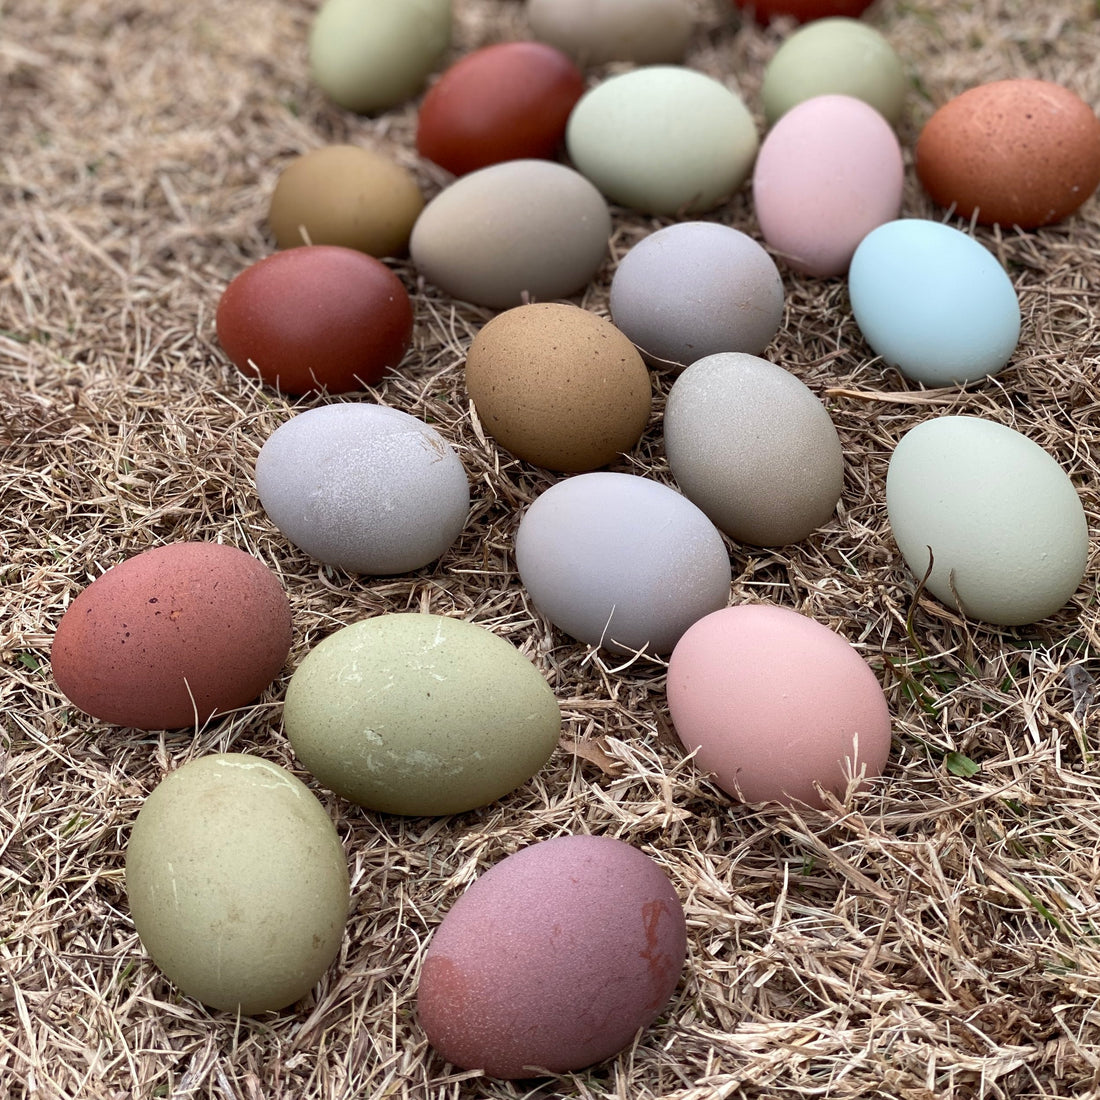 Hatching Your Own Chicken Eggs: Best Practices and High-Quality Hatching Eggs for Sale